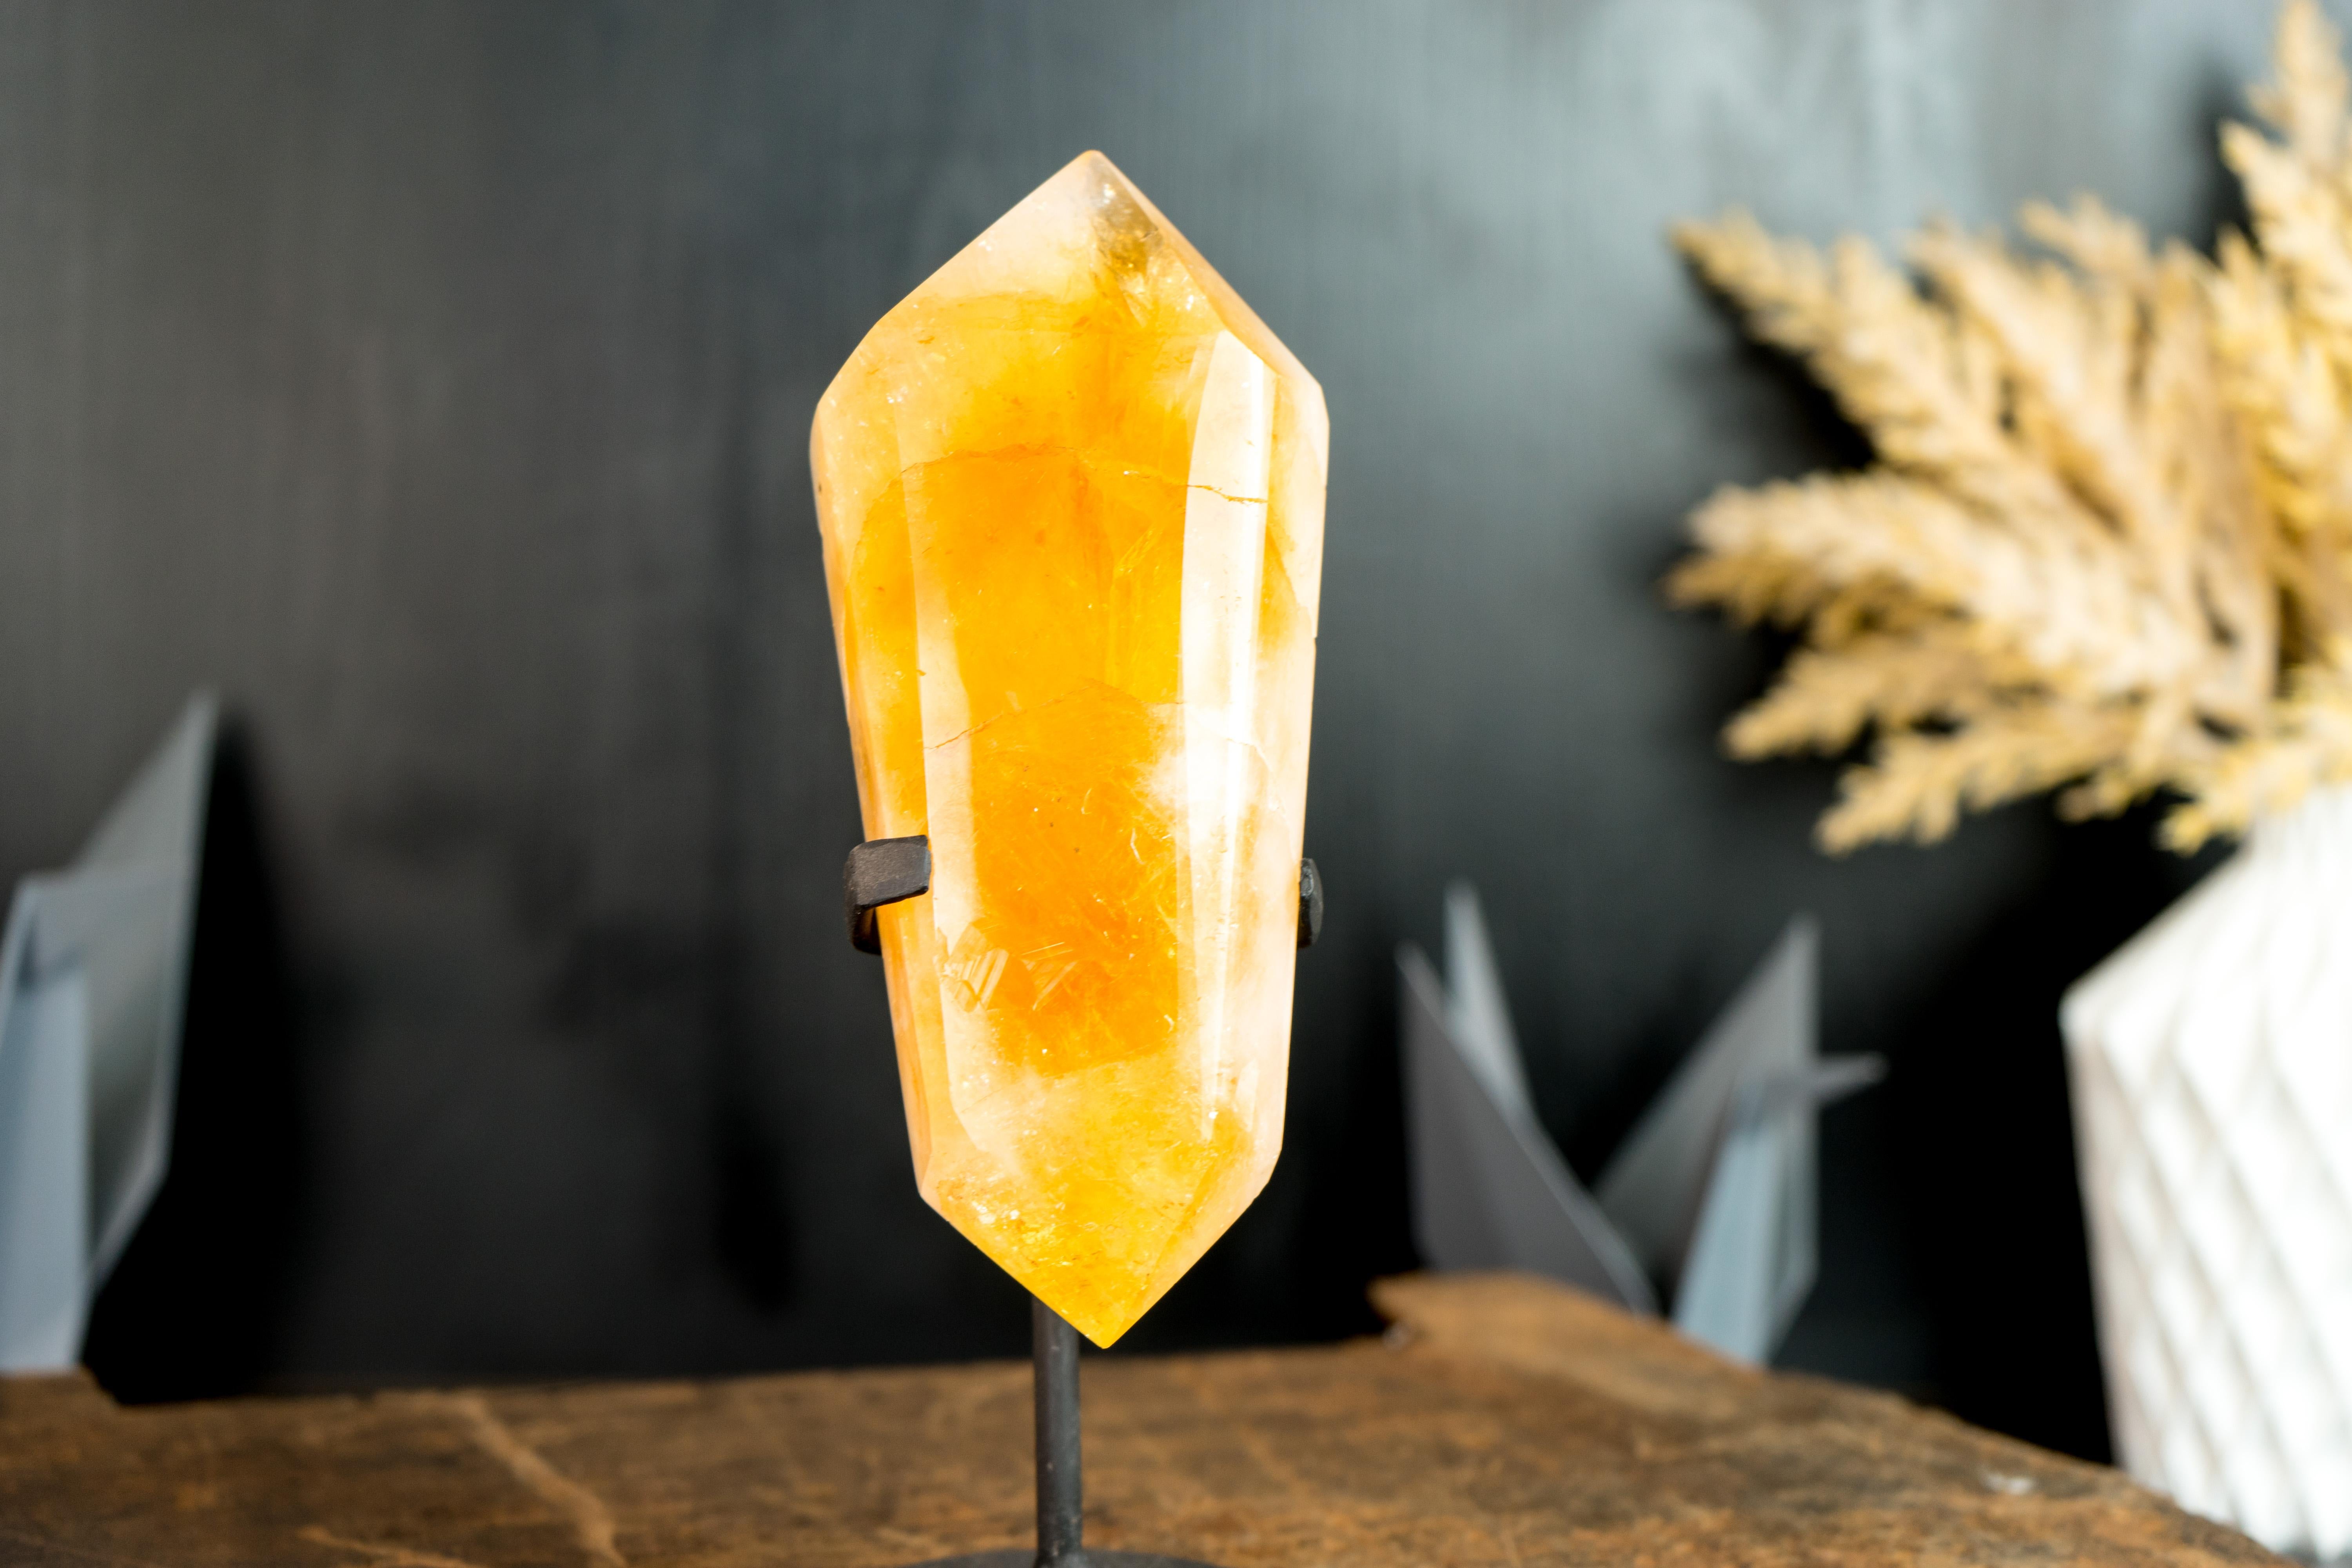 A gorgeous, large, bi-terminated Brazilian Citrine point that brings a candy-like, fabulous deep orange citrine color, which is characteristic of high-grade citrines. This is formed in an XL-size specimen, rarely seen in Citrines from South Brazil.